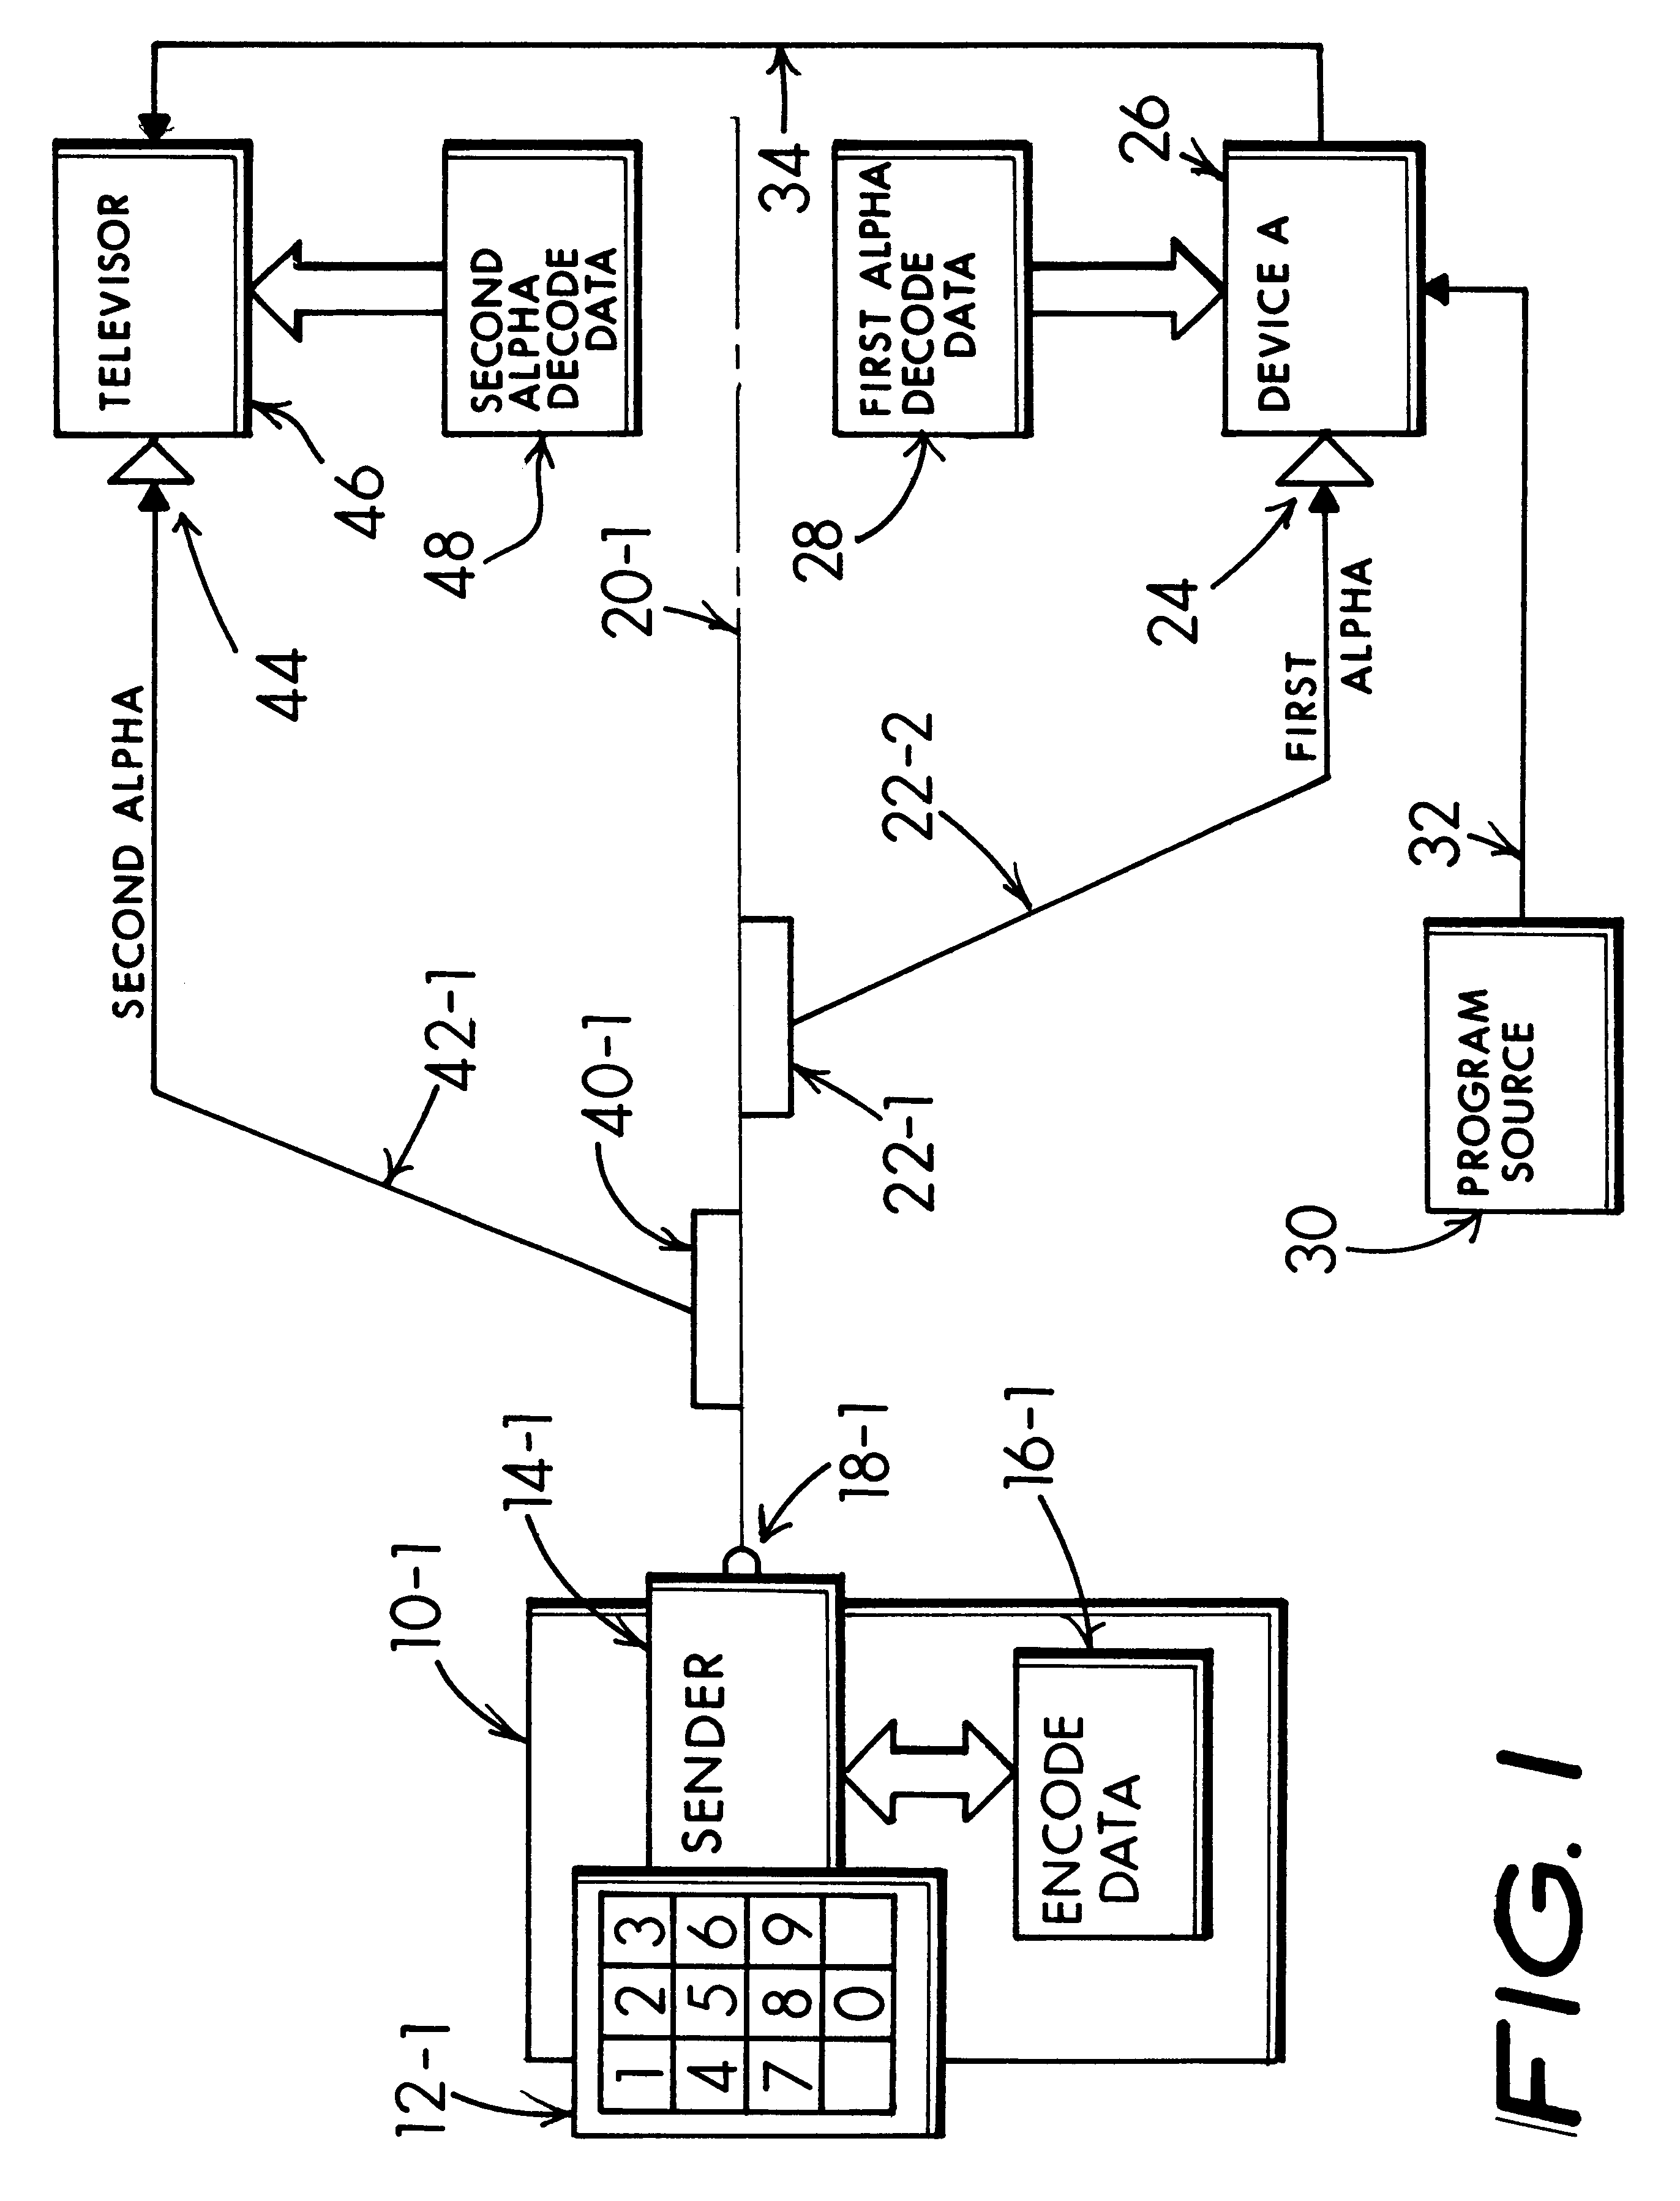 Alternate command signal decoding option for a remotely controlled apparatus